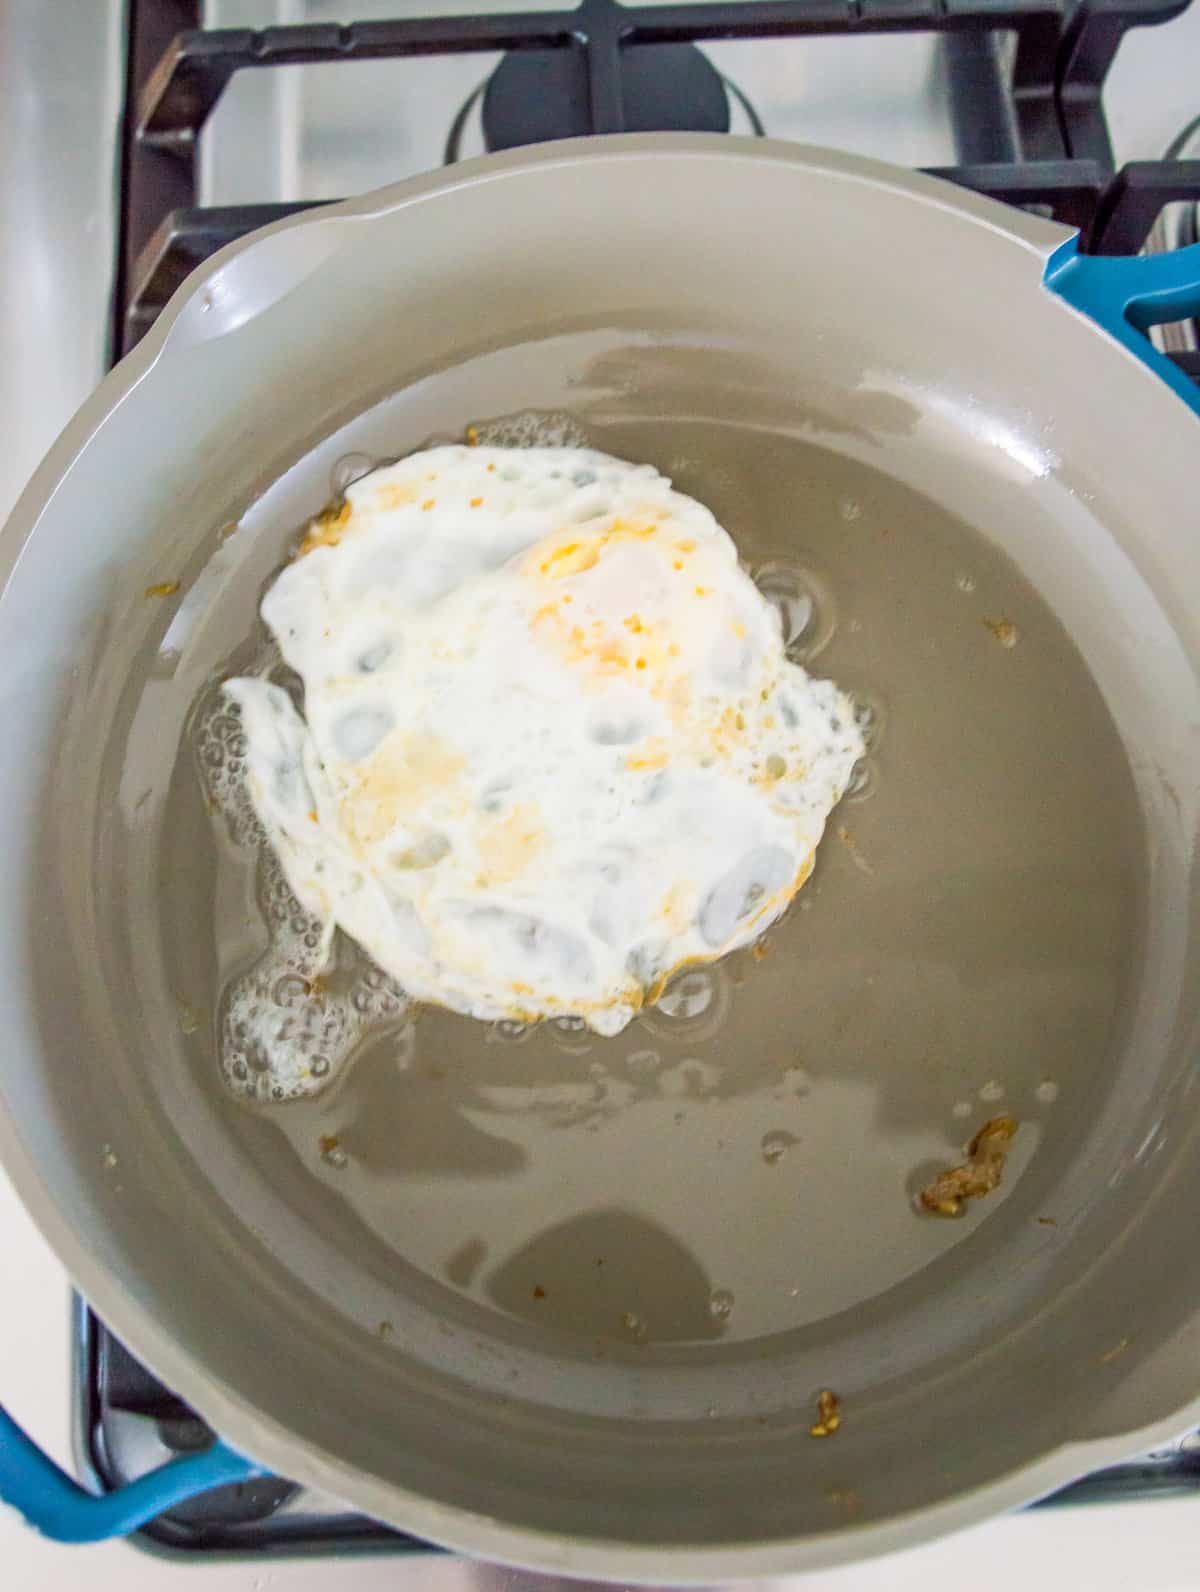 An over medium egg being cooked in a frying pan.